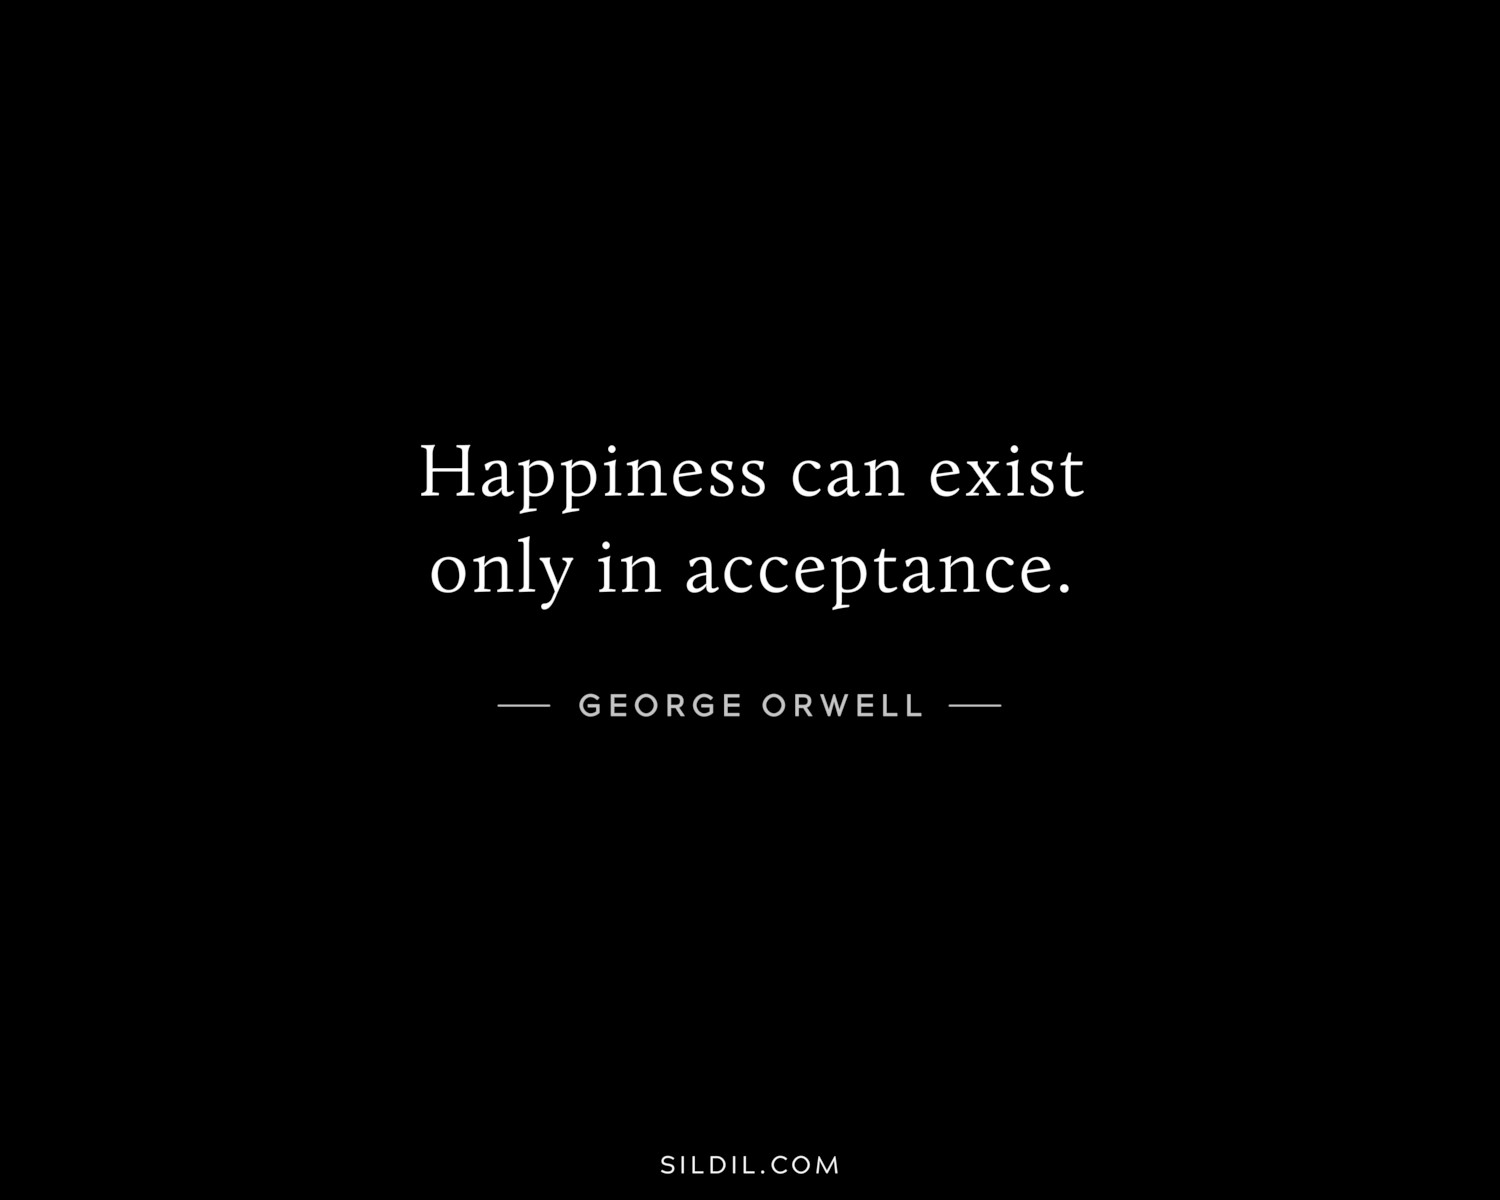 Happiness can exist only in acceptance.